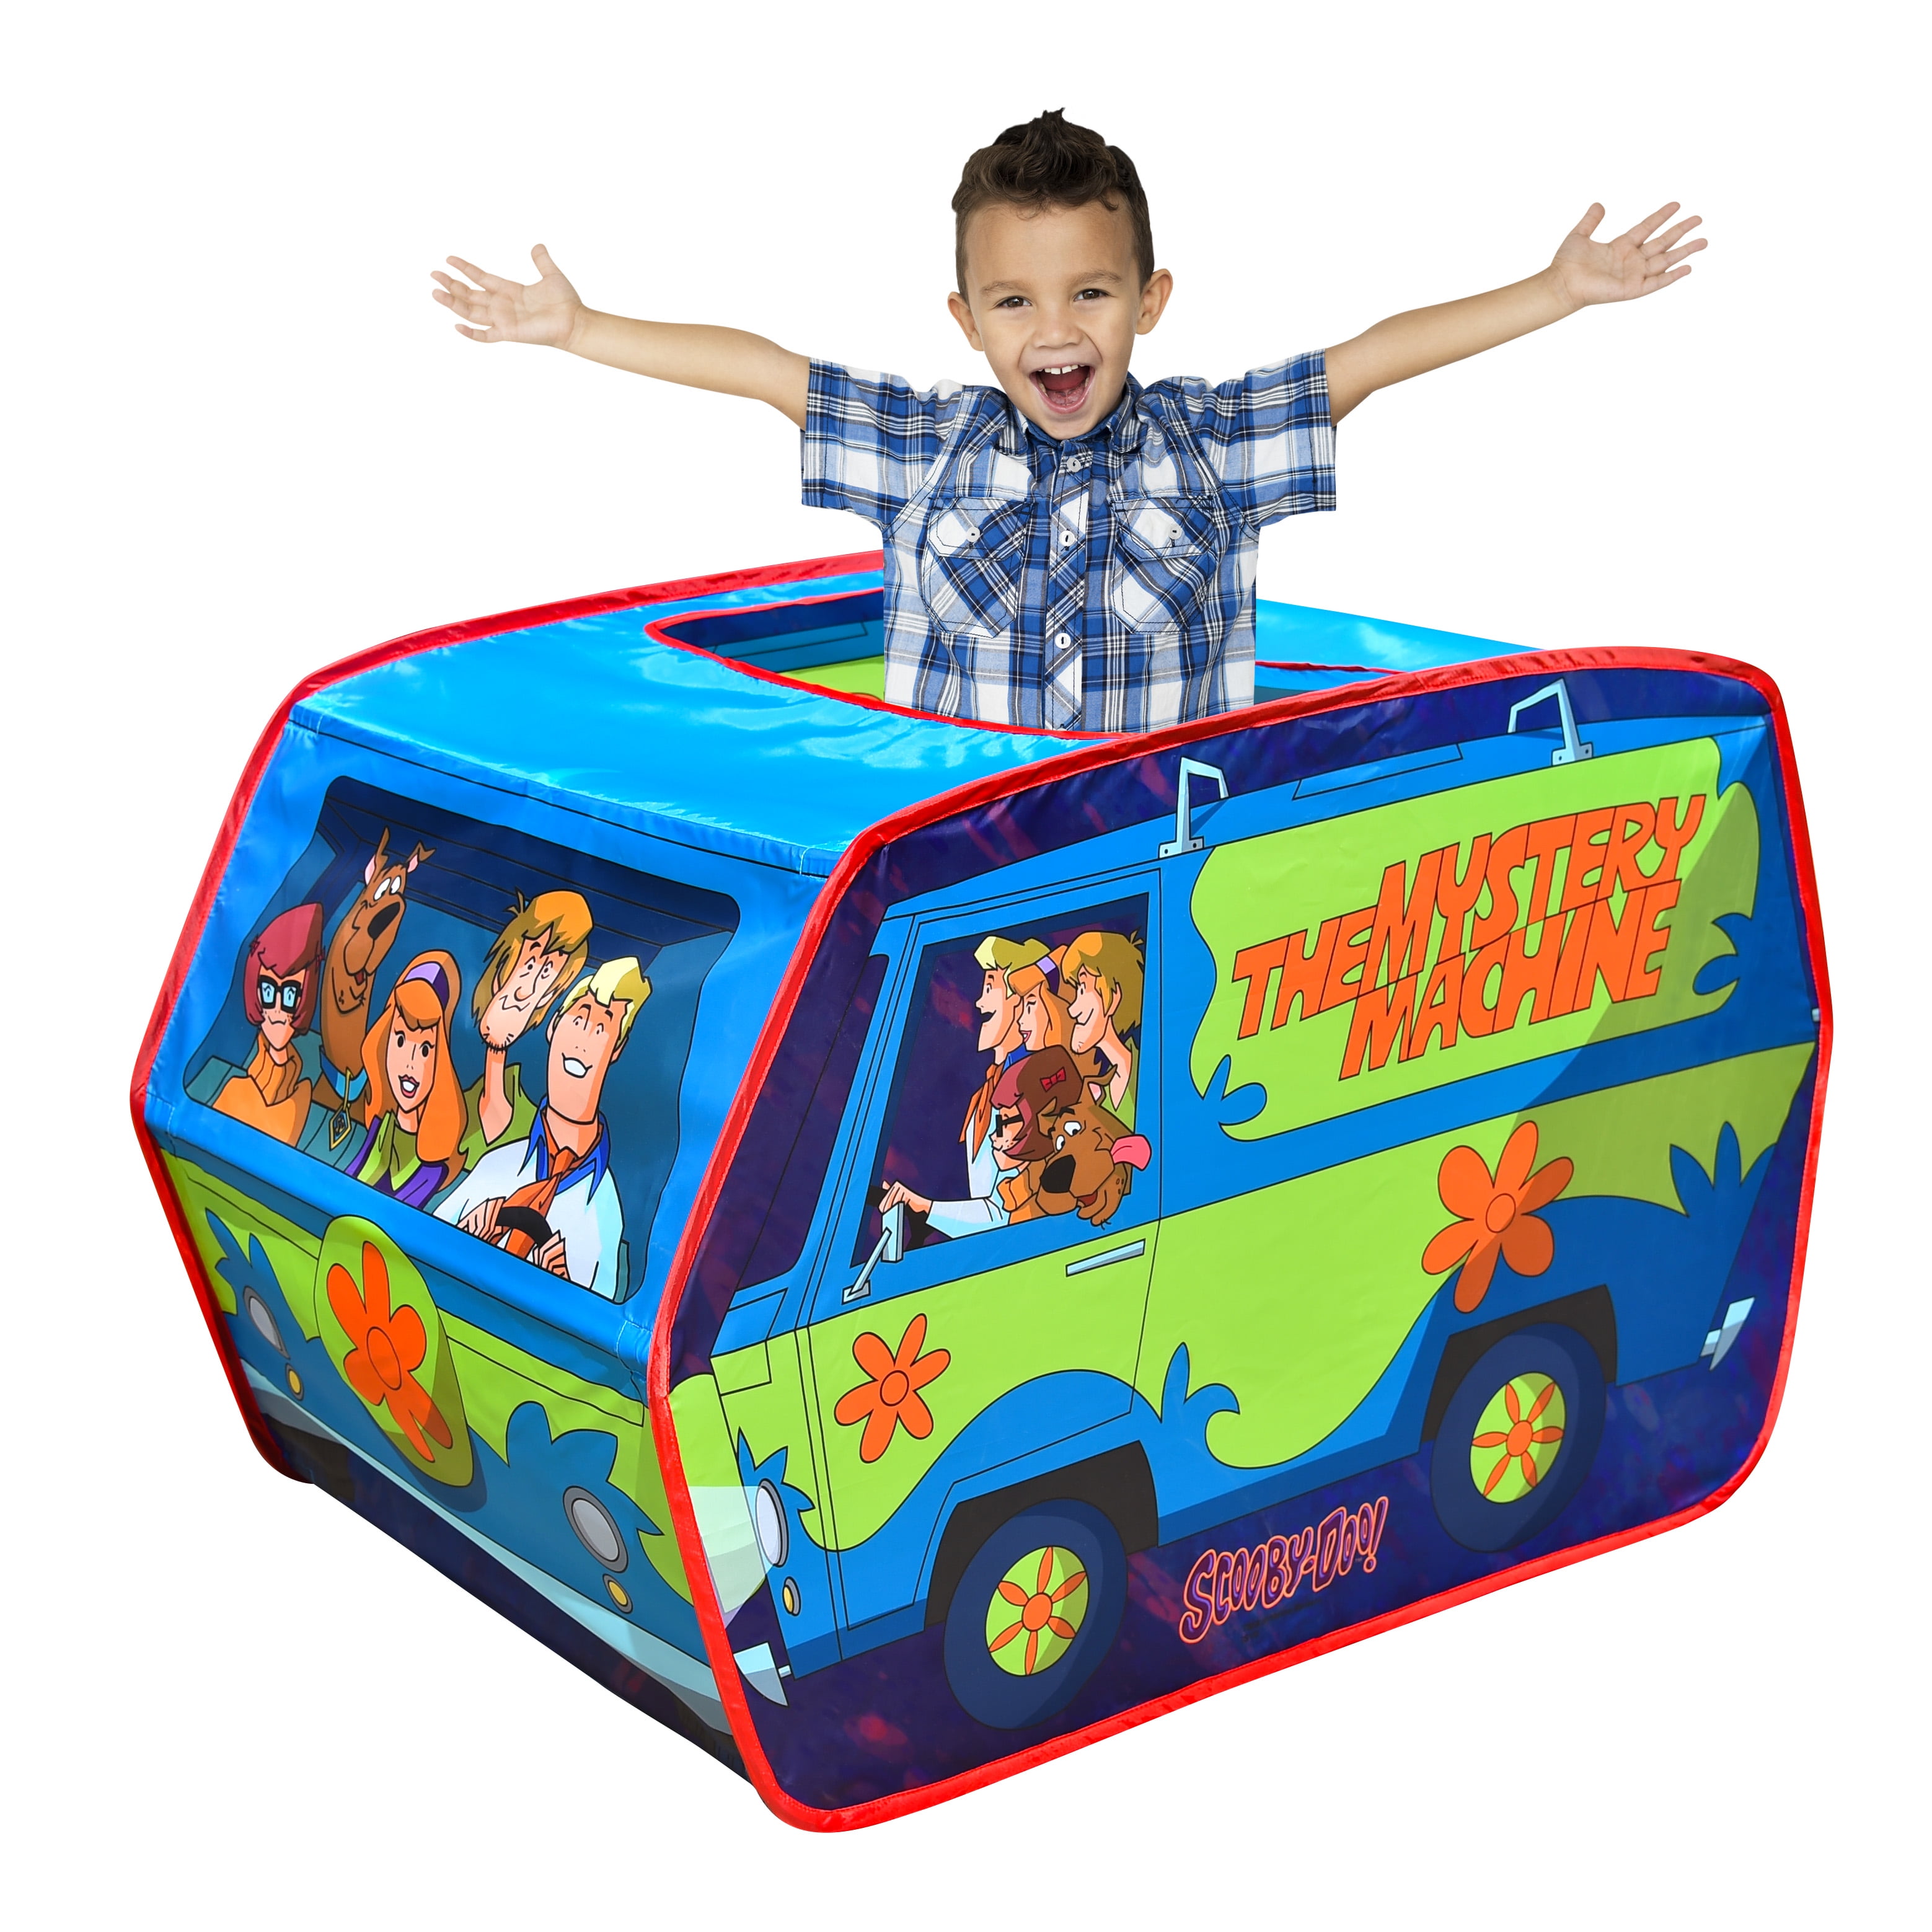 USA Toyz Pop Up Rocket Tent with Projector Toy 7141229 for sale online 